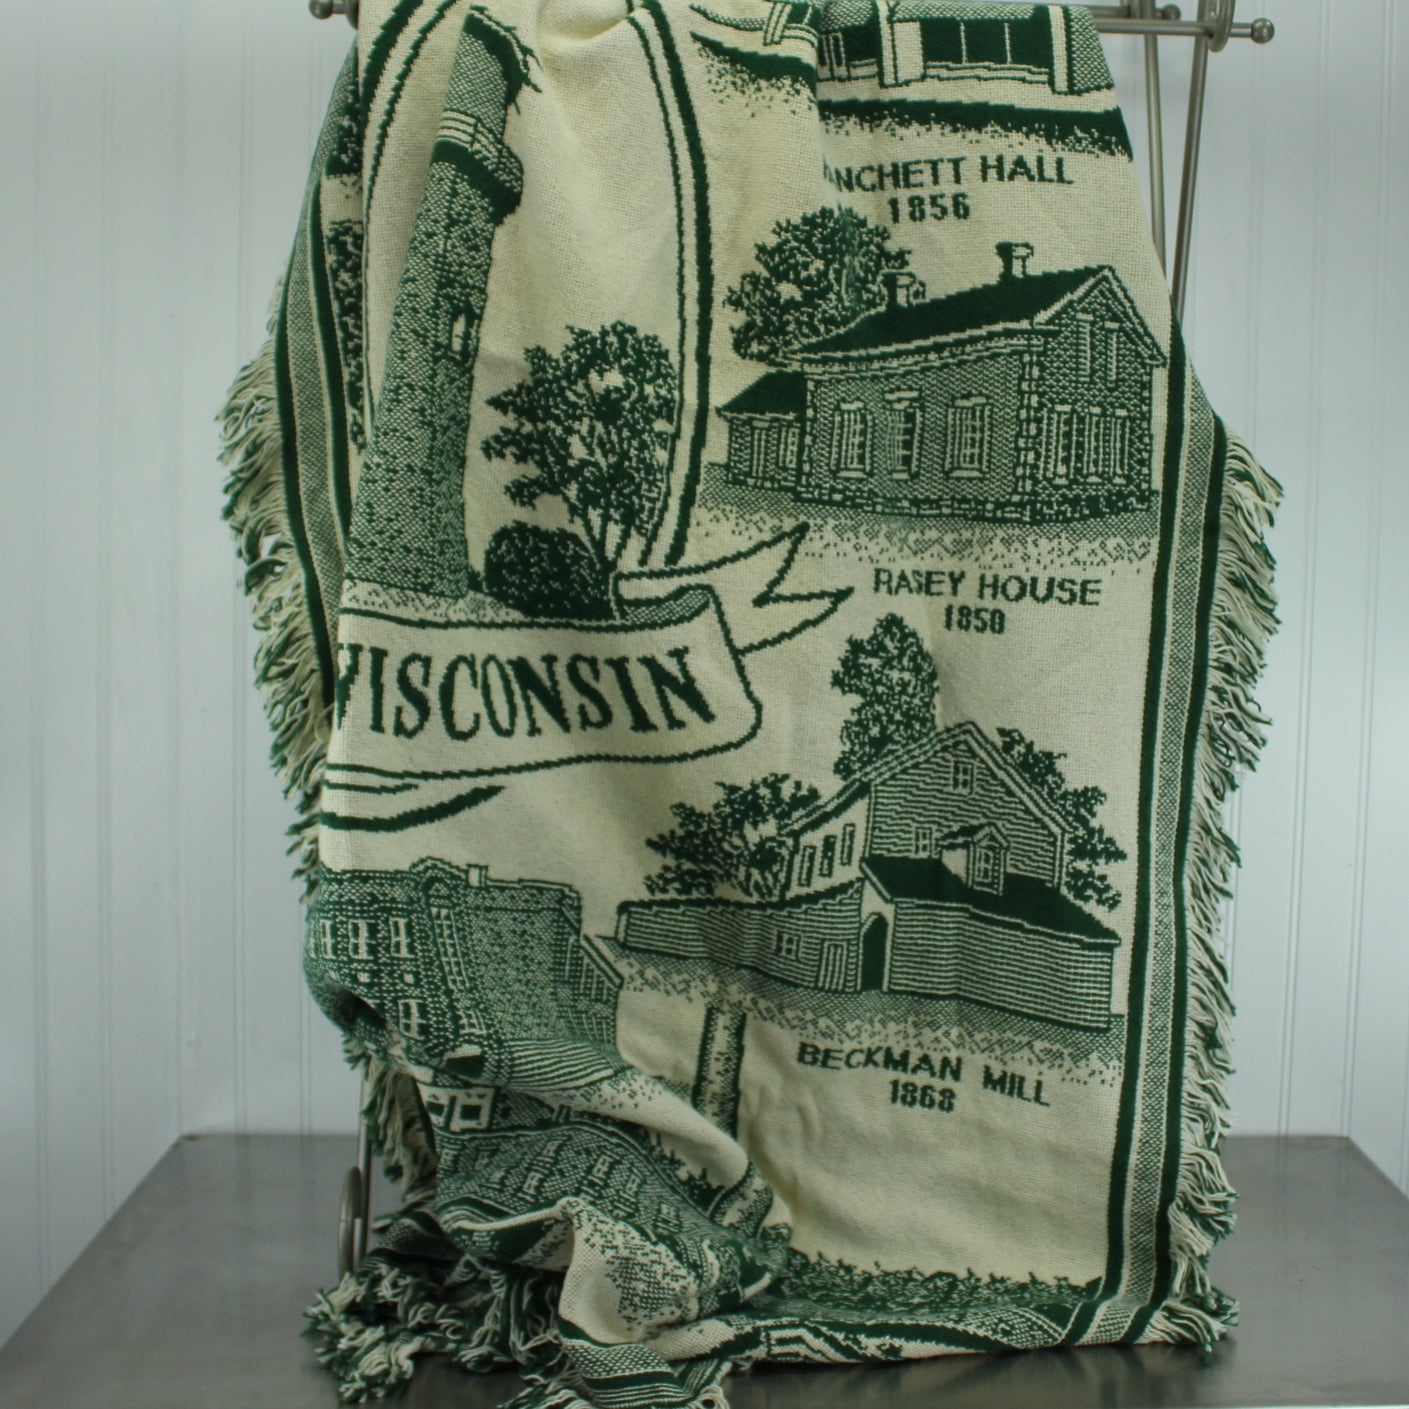 Beloit Wisconsin Woven Cotton Throw Blanket New Condition Historical Society Design Riddle Cockrell Lincoln Roosevelt Jr. High School